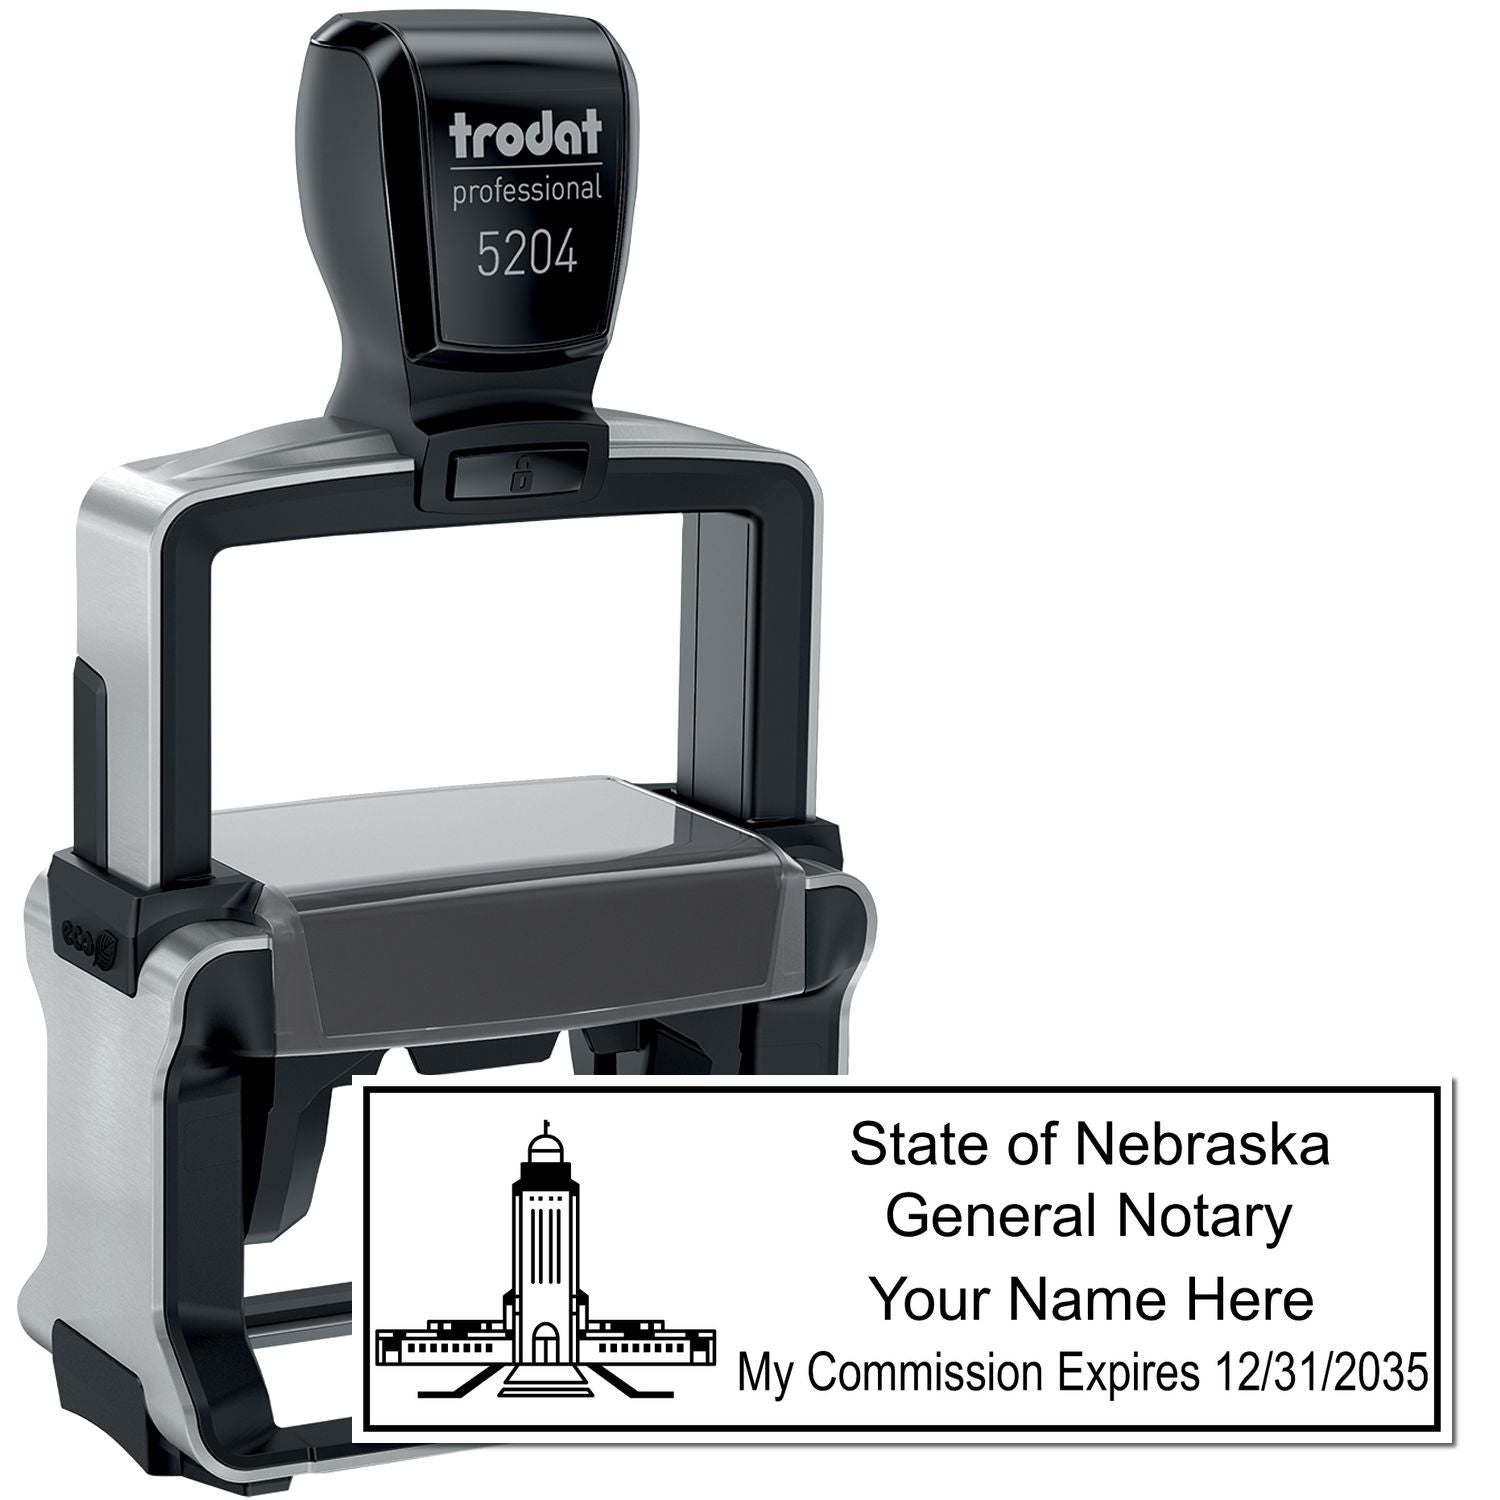 The main image for the Heavy-Duty Nebraska Rectangular Notary Stamp depicting a sample of the imprint and electronic files